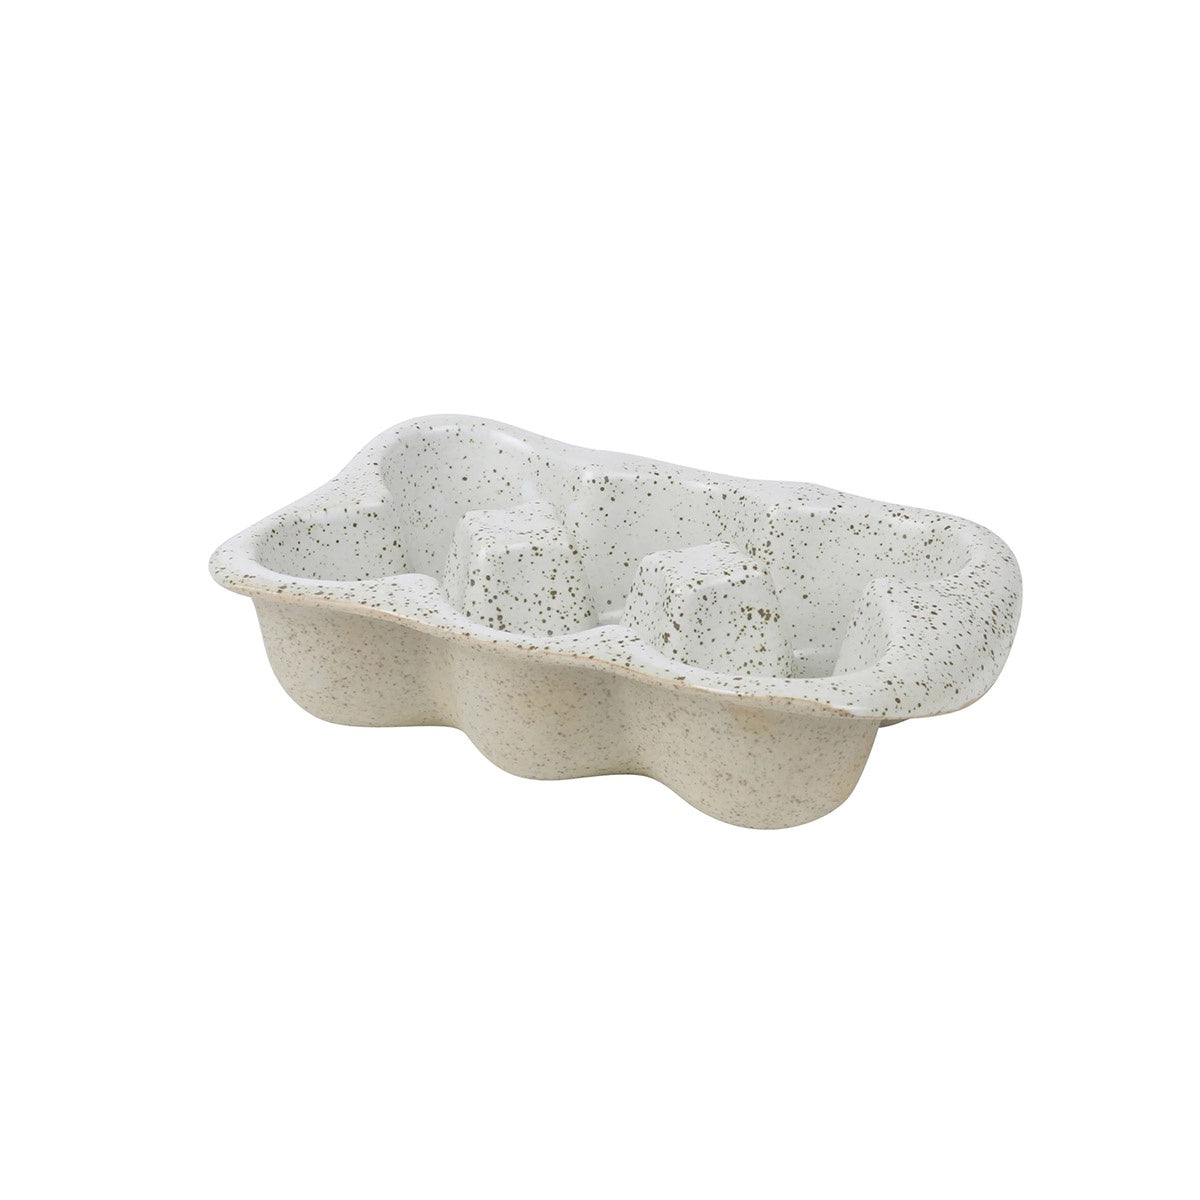 Egg Crate 6 Cup White Garden to Table